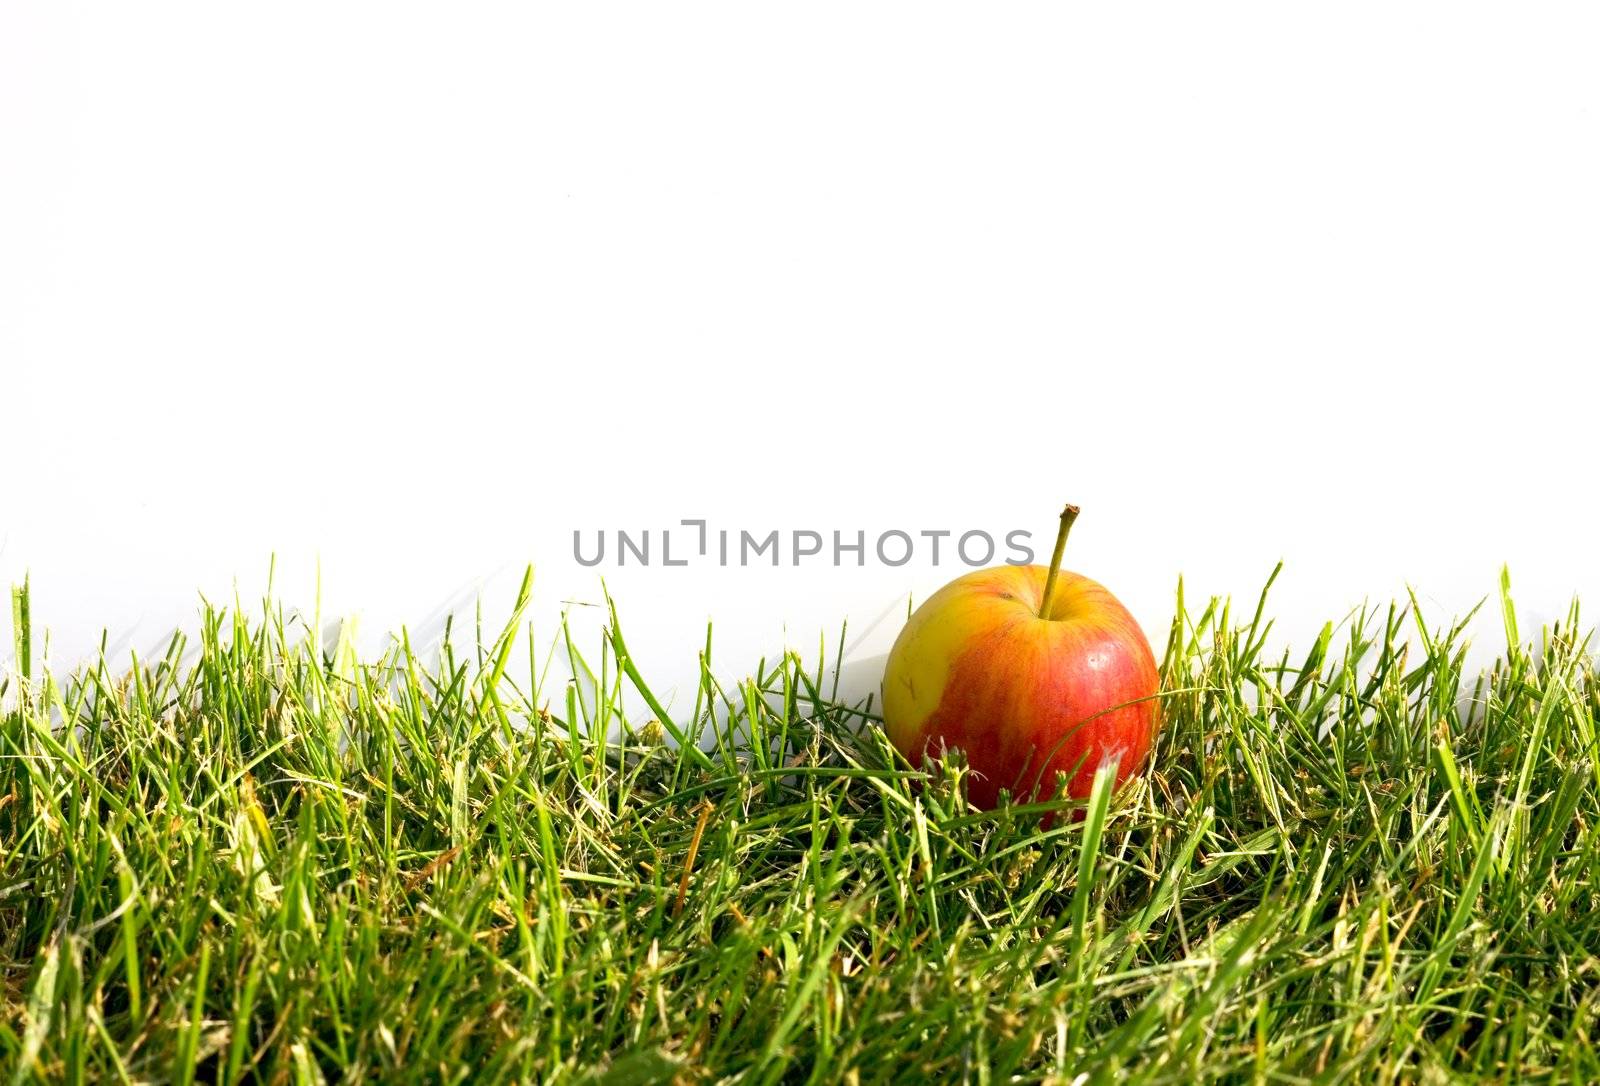 The red ripe apple in green grass